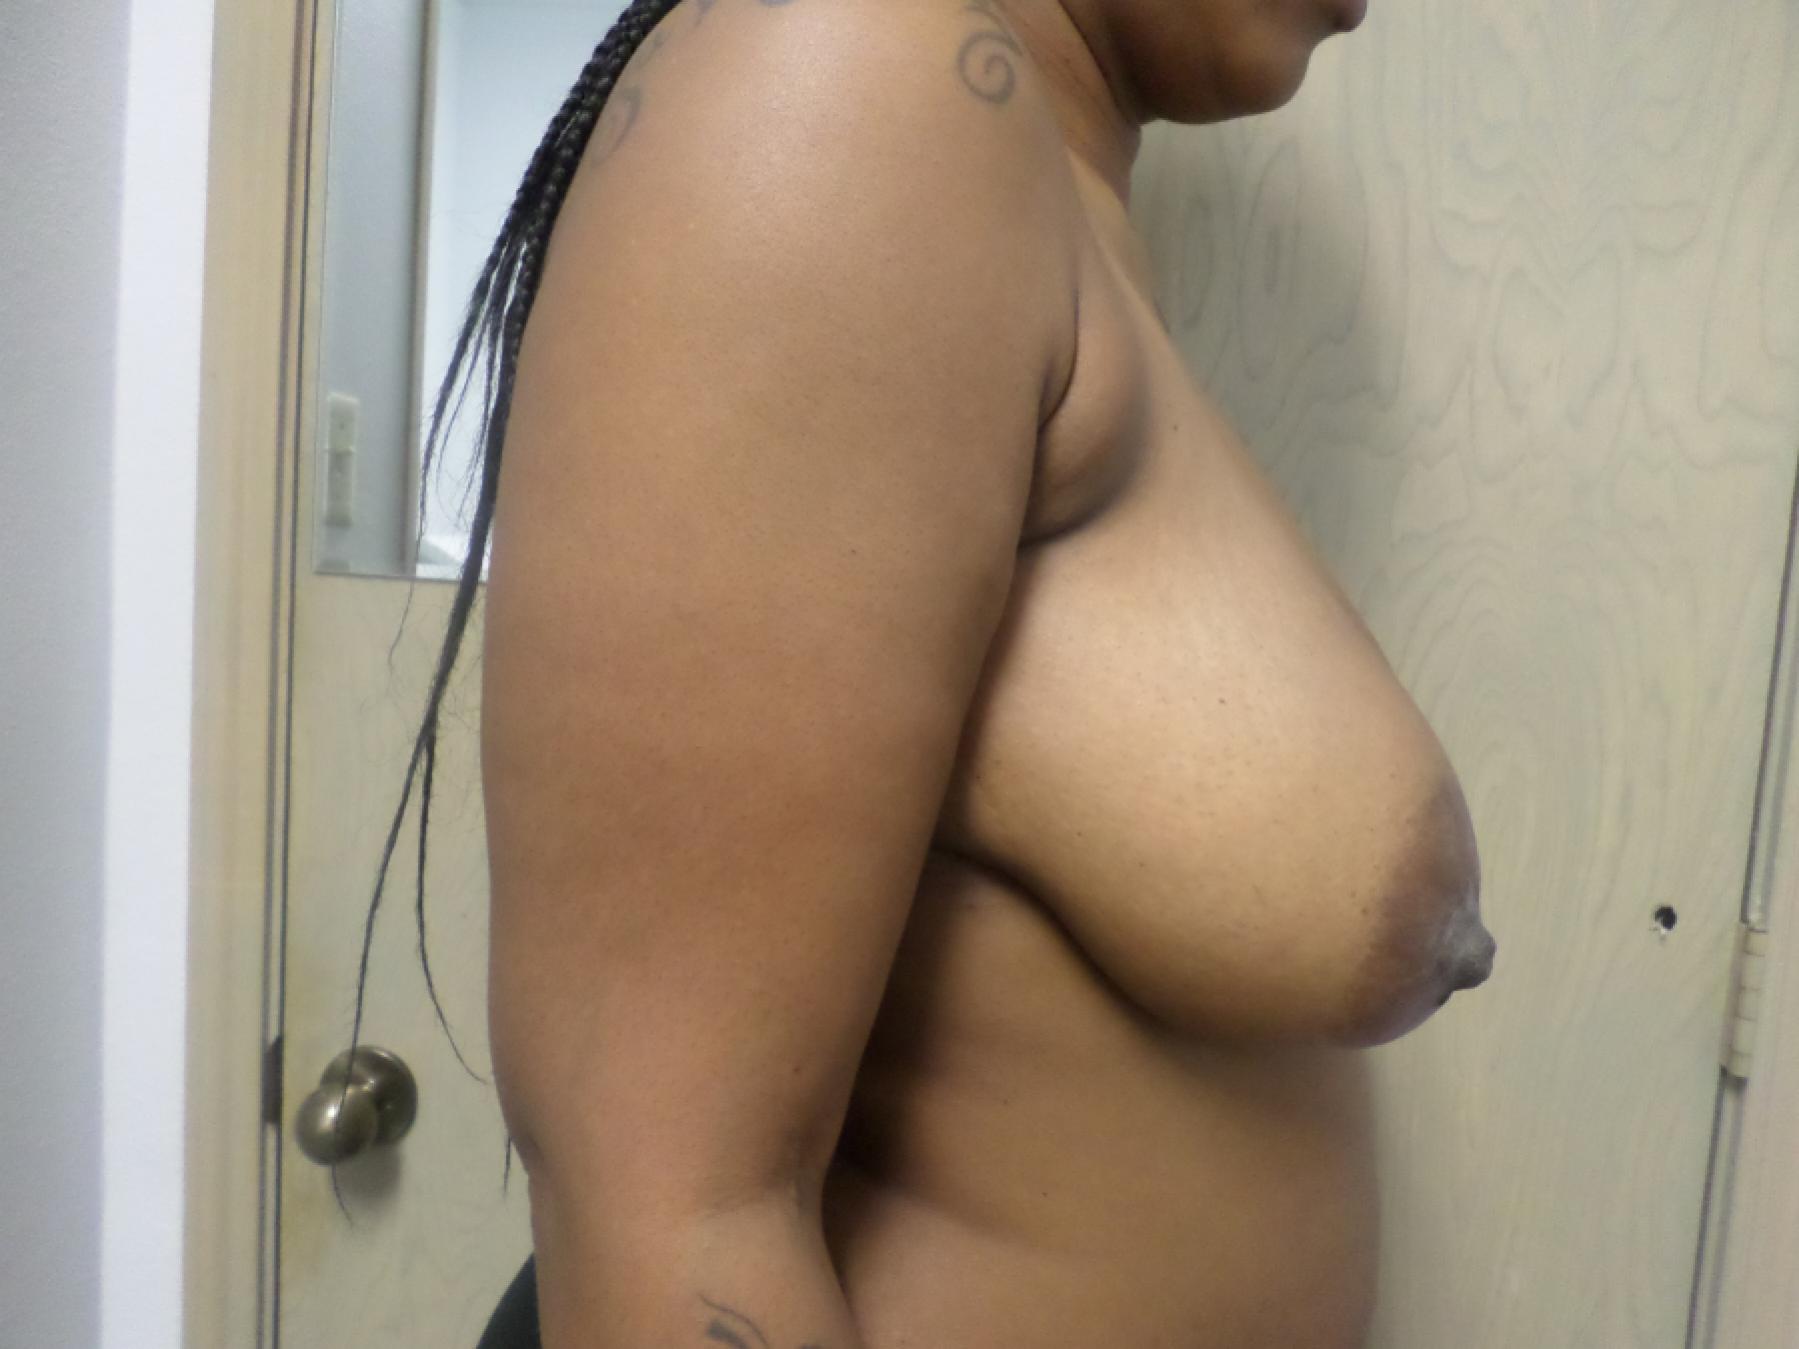 Breast Reduction: Patient 8 - Before and After 5